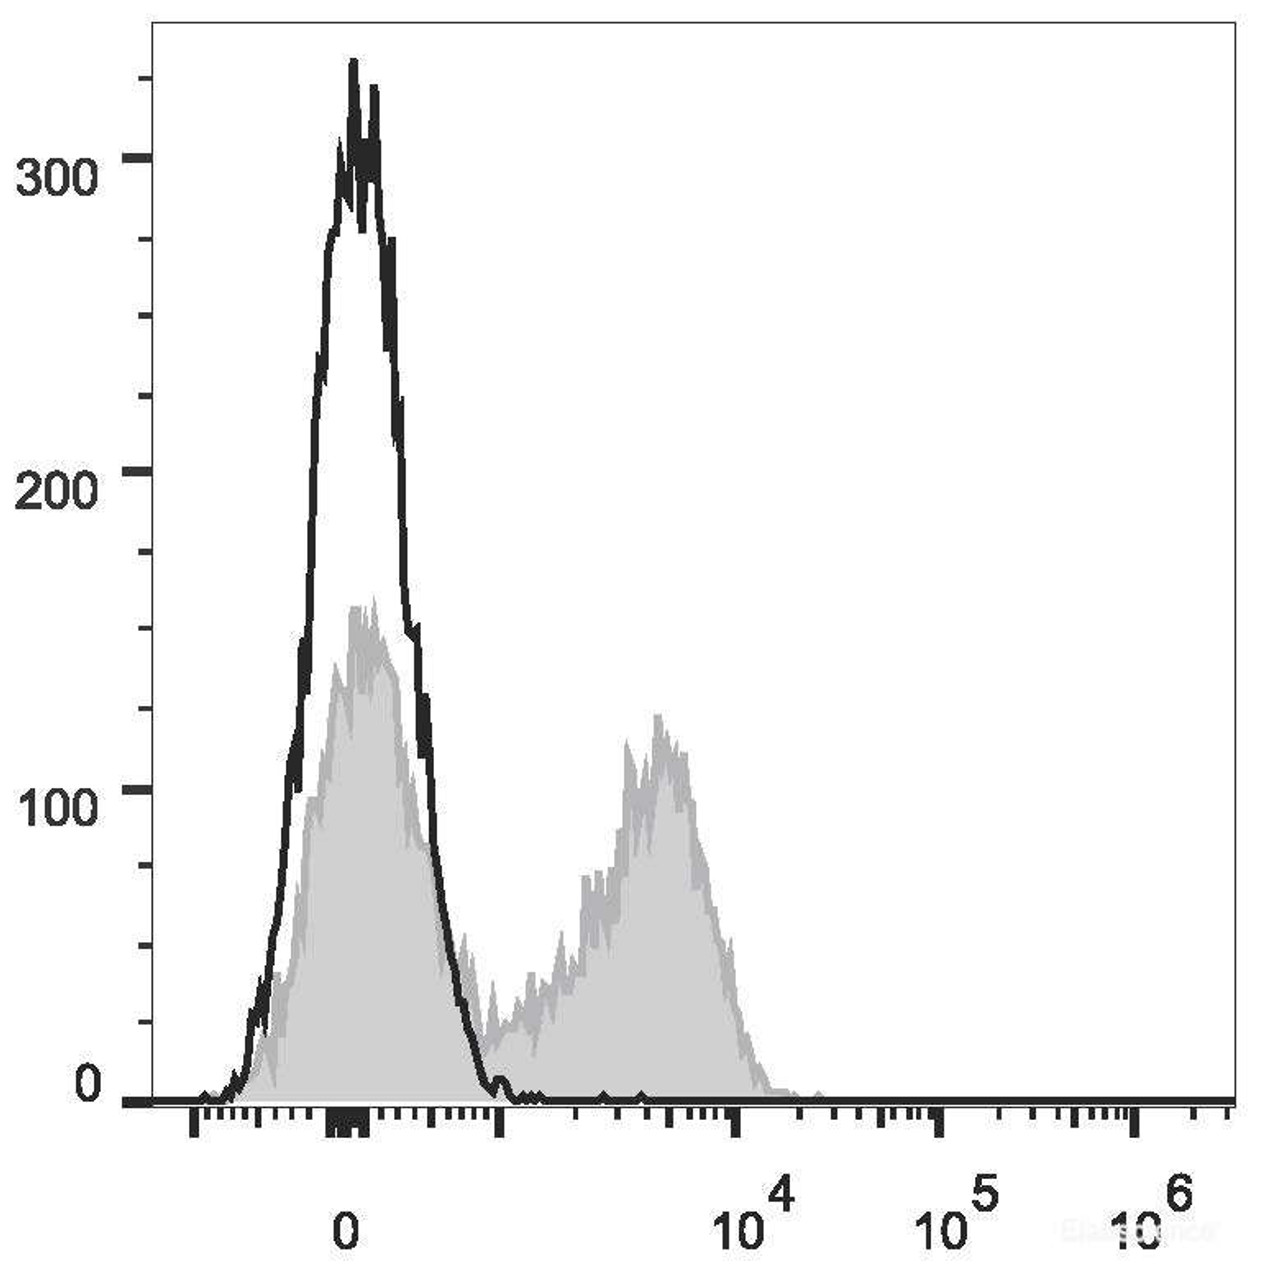 C57BL/6 murine splenocytes are stained with APC Anti-Mouse CD23 Antibody[Used at .2 μg/1<sup>6</sup> cells dilution](filled gray histogram). Unstained splenocytes (empty black histogram) are used as control.